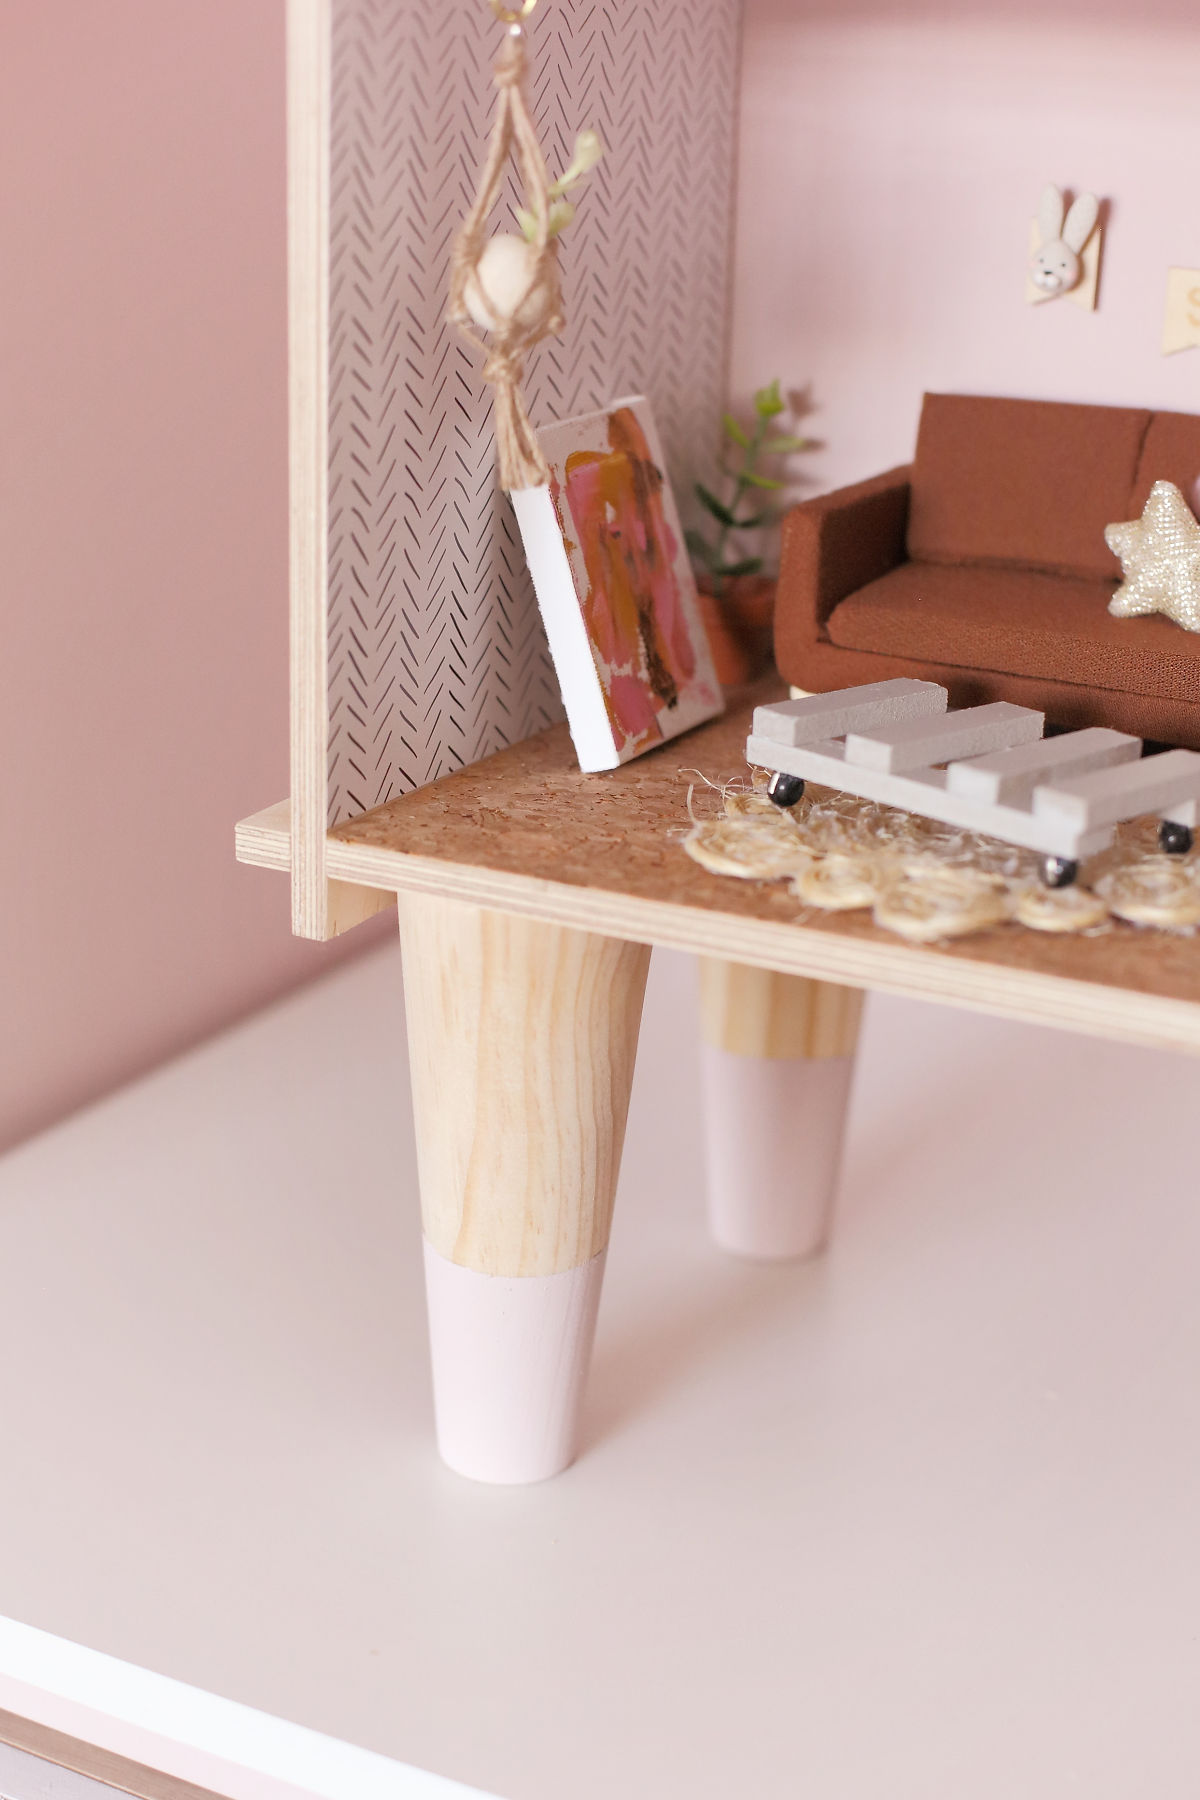 Set of 4 Cone-shaped wooden dollhouse legs